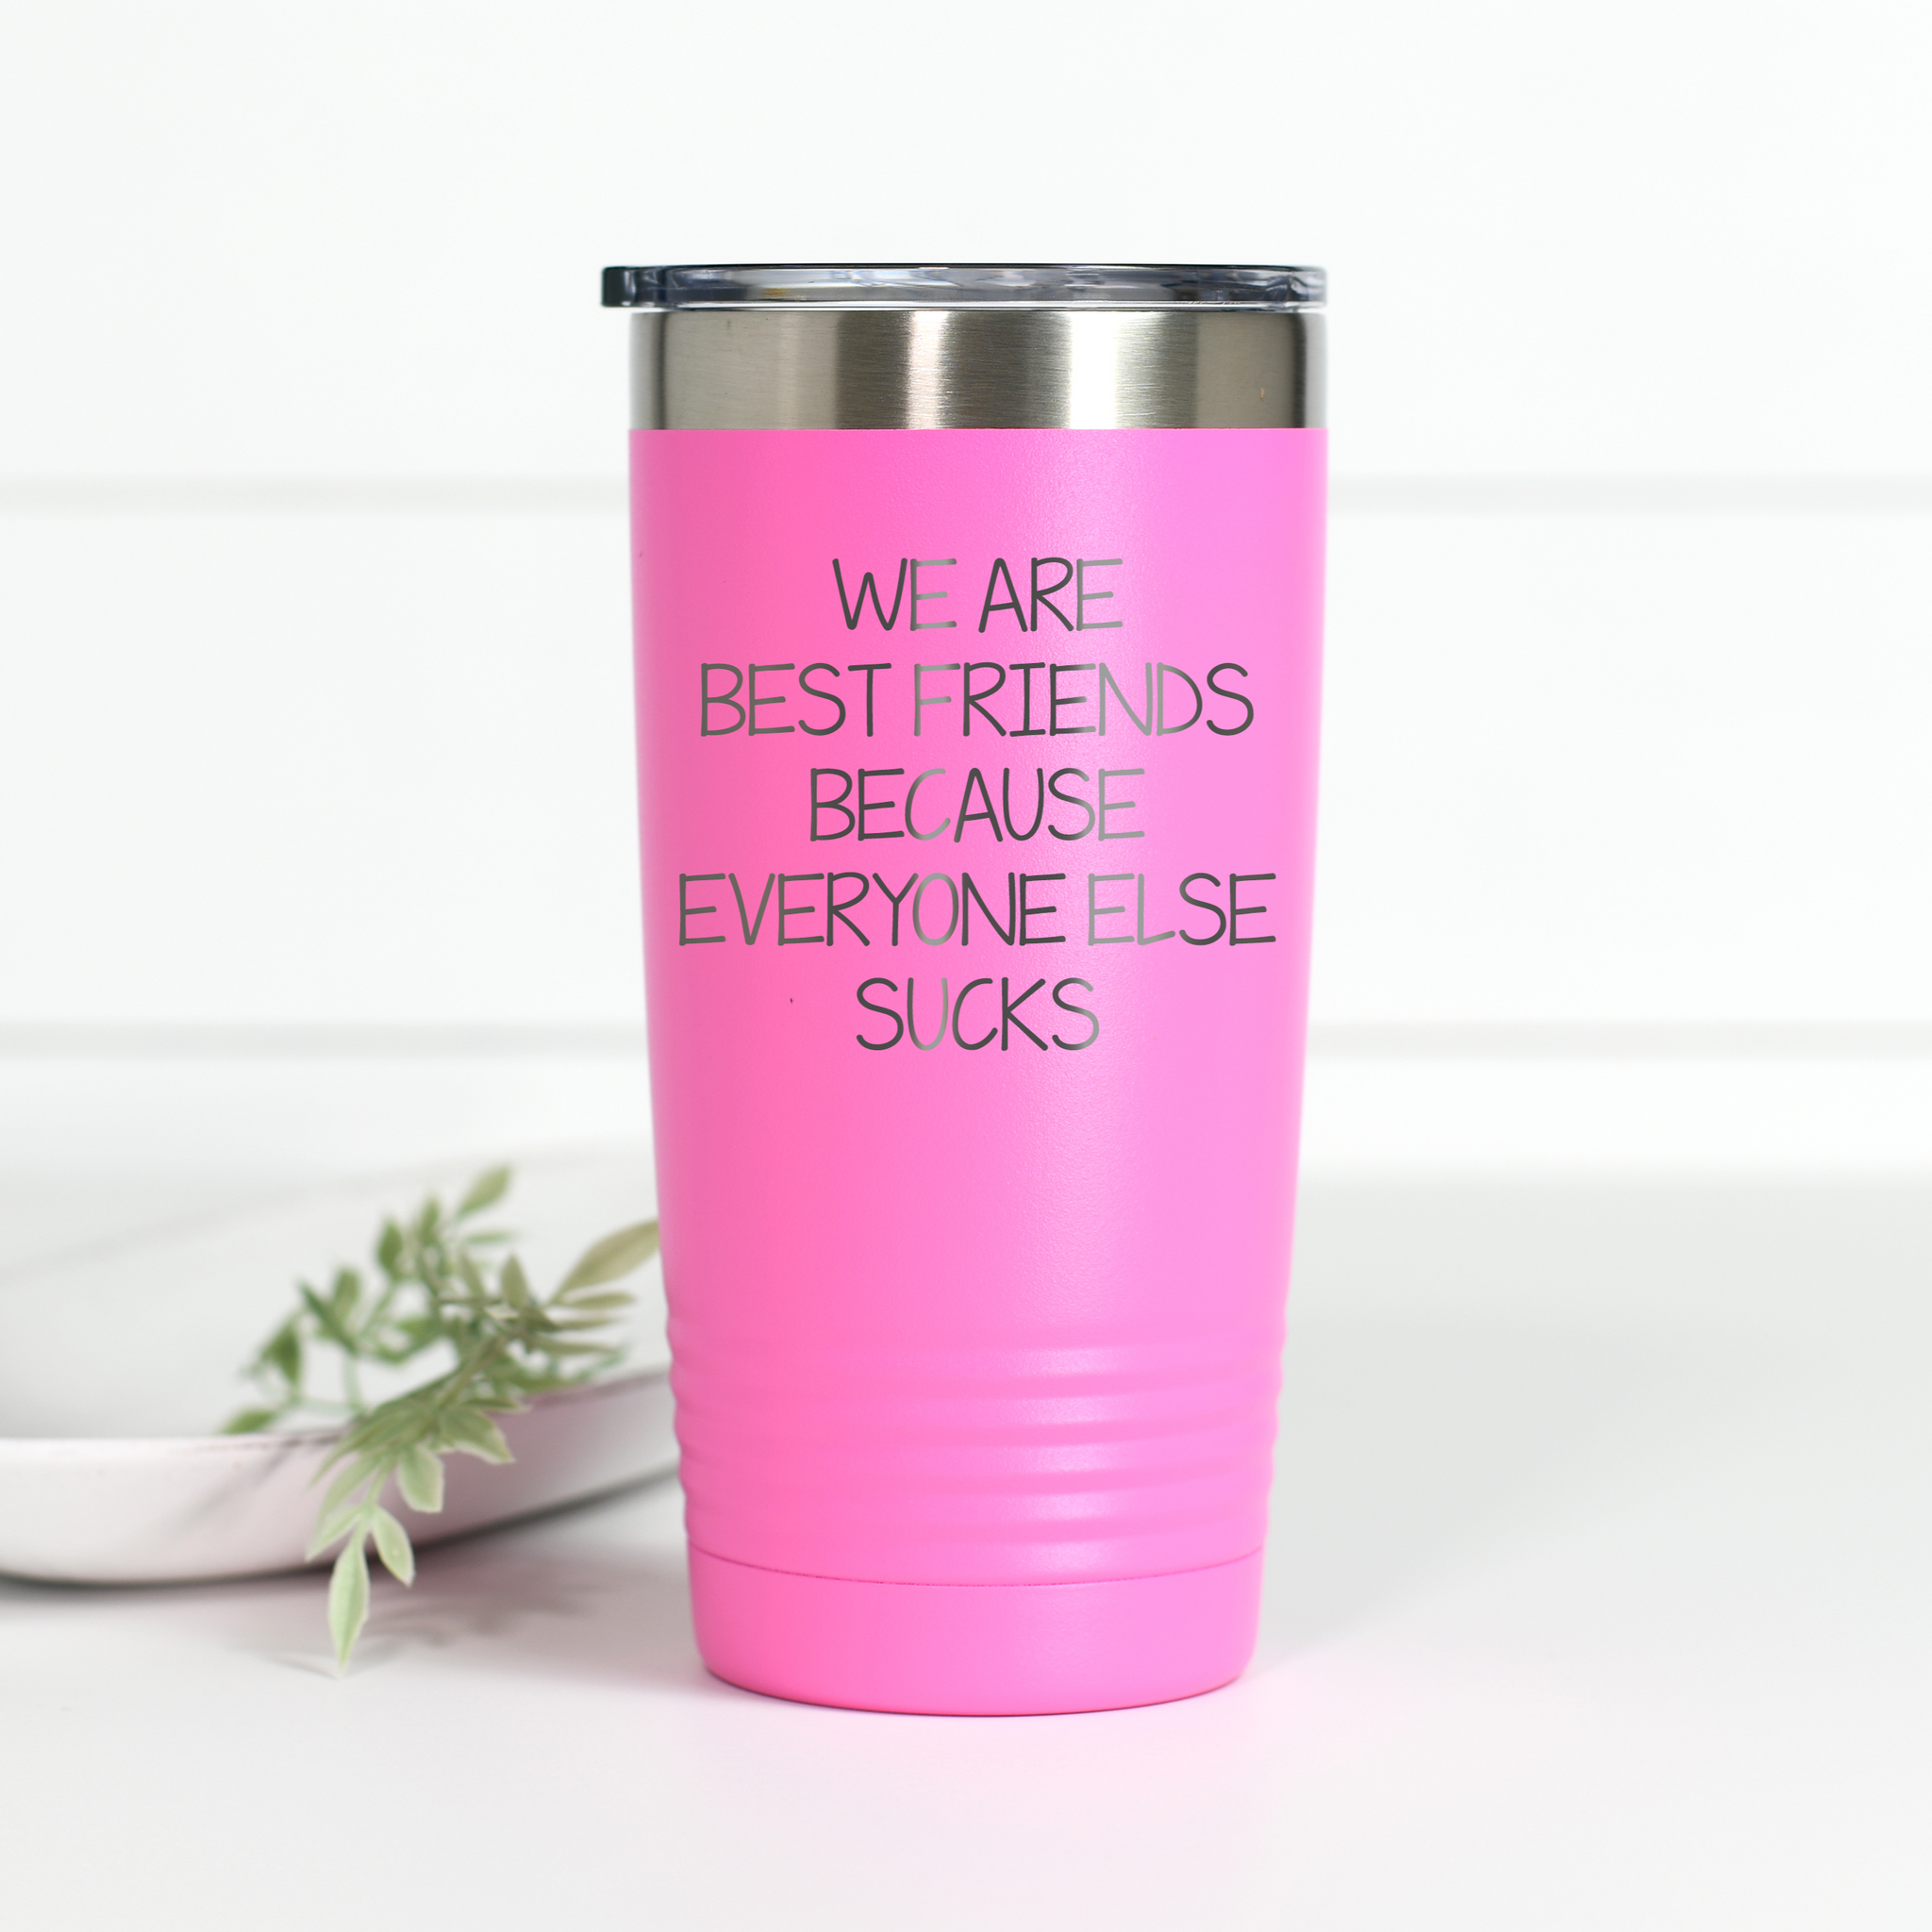 All Around 20 oz Tumbler Cup